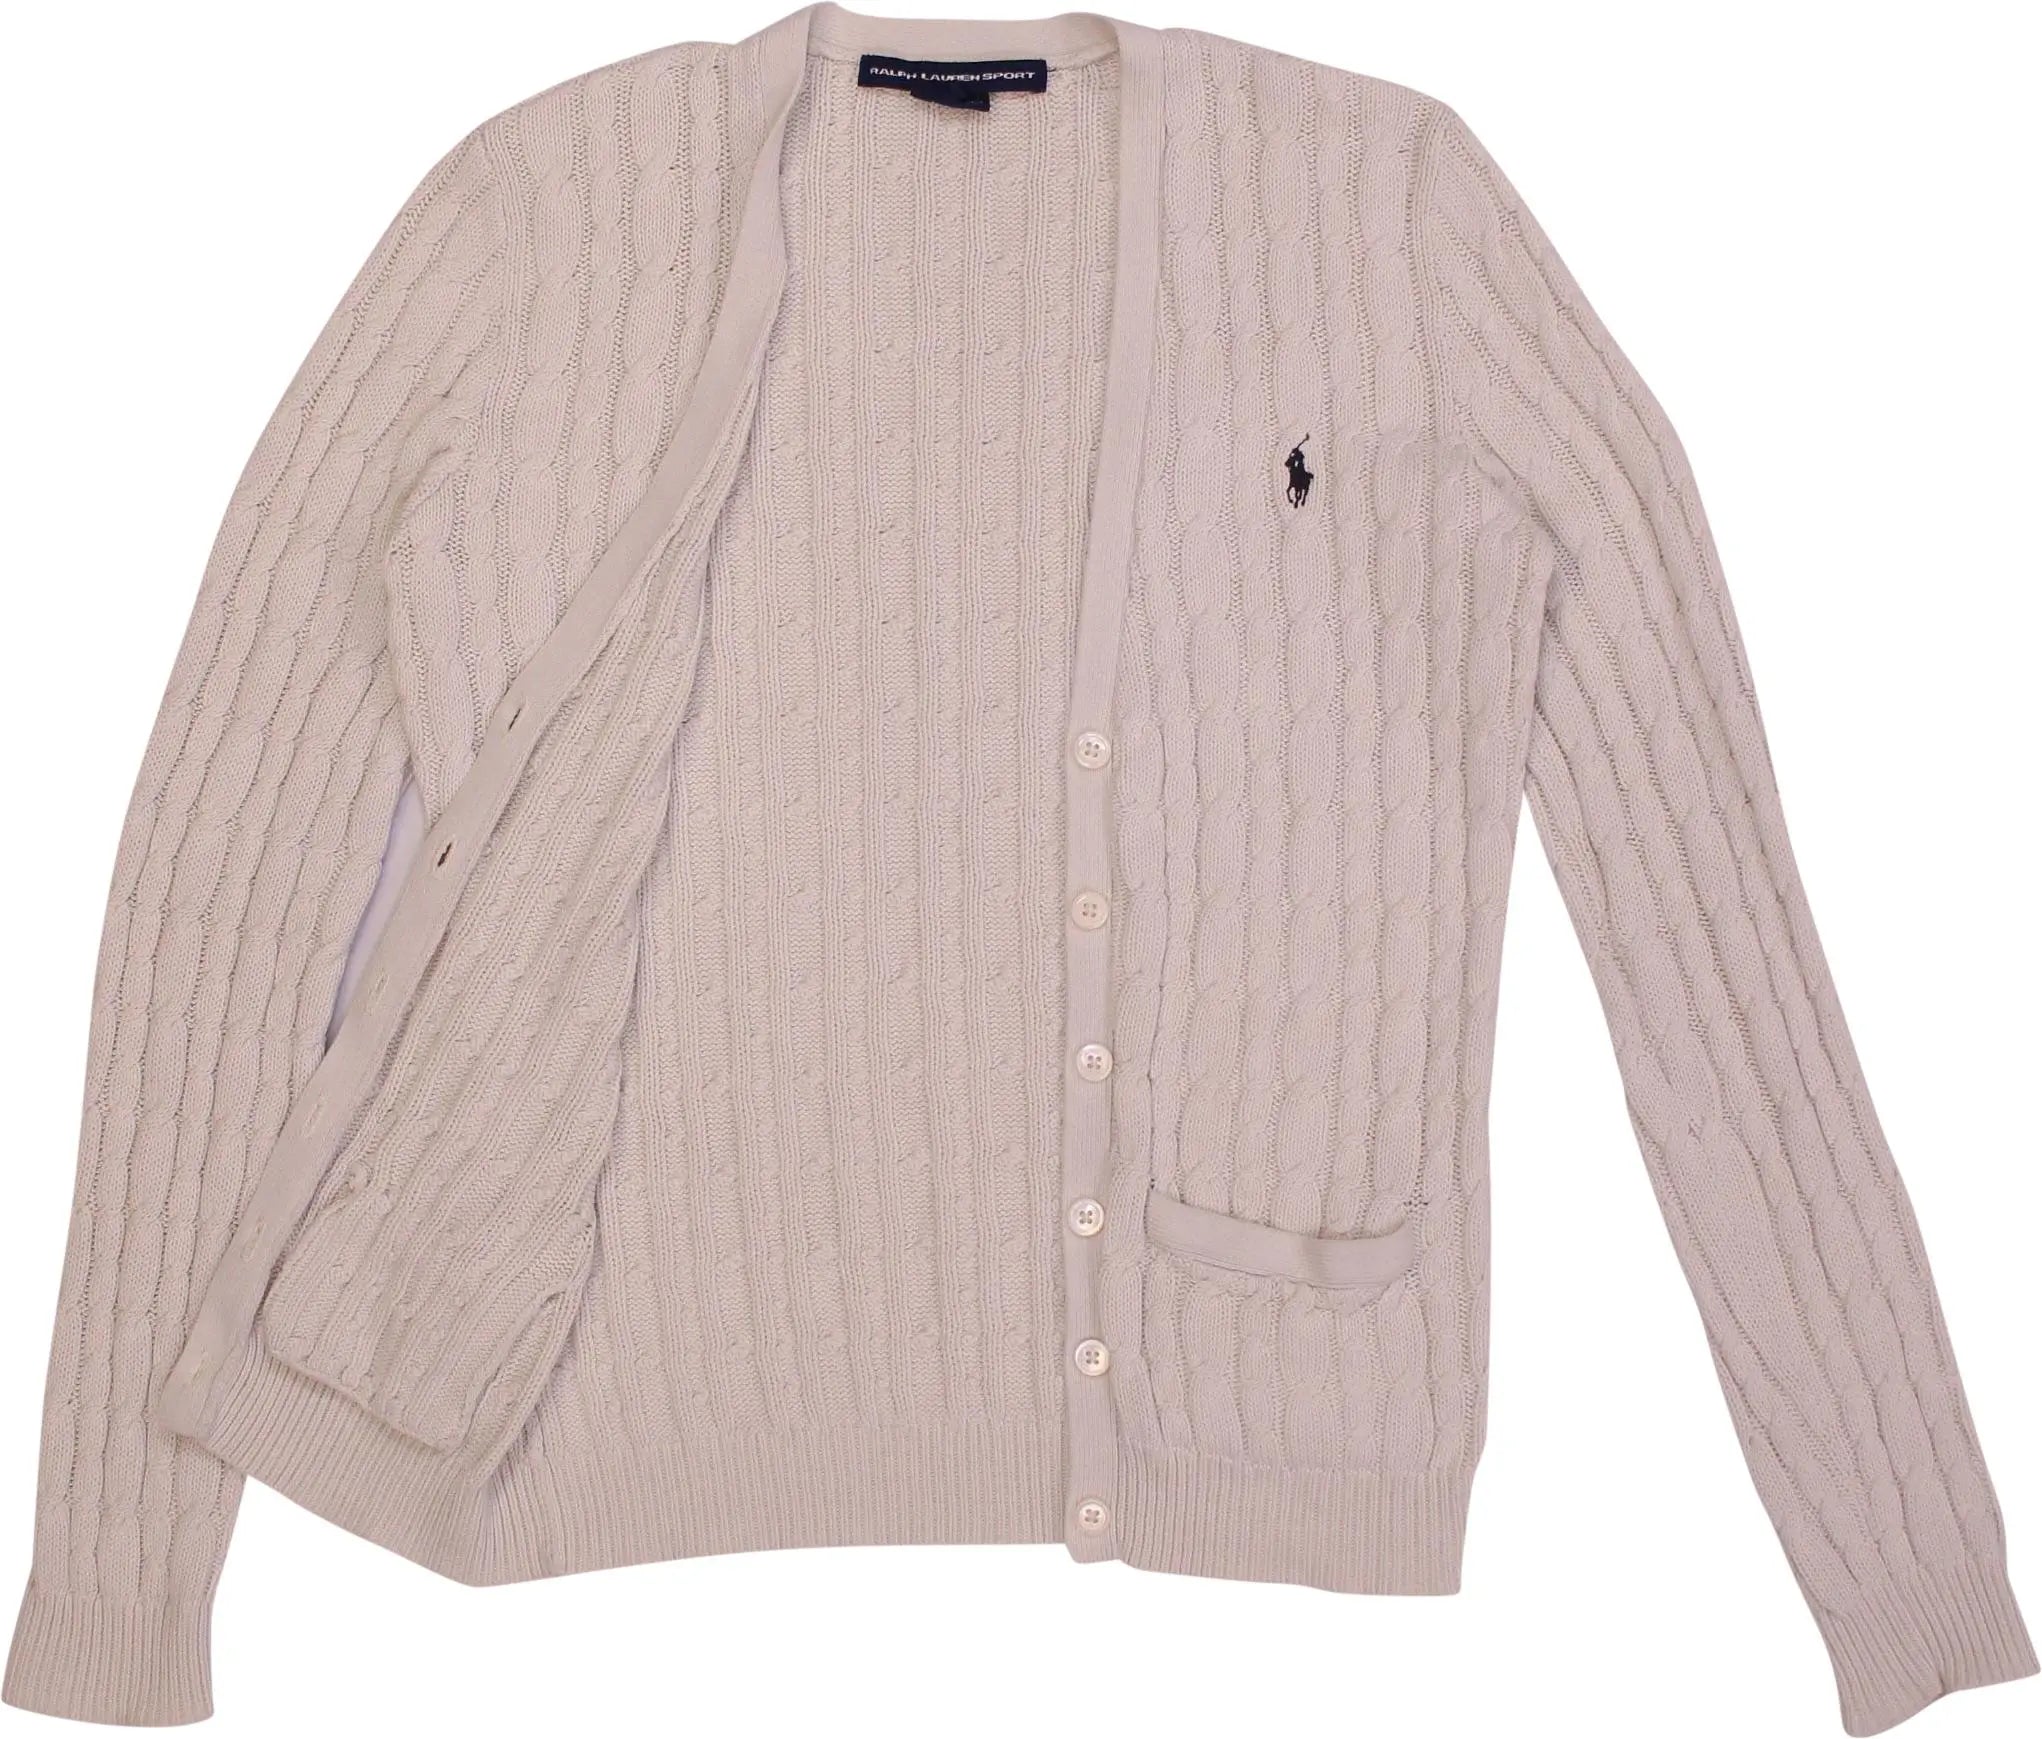 Ralph Lauren - Knitted Cardigan by Ralph Lauren Sport- ThriftTale.com - Vintage and second handclothing